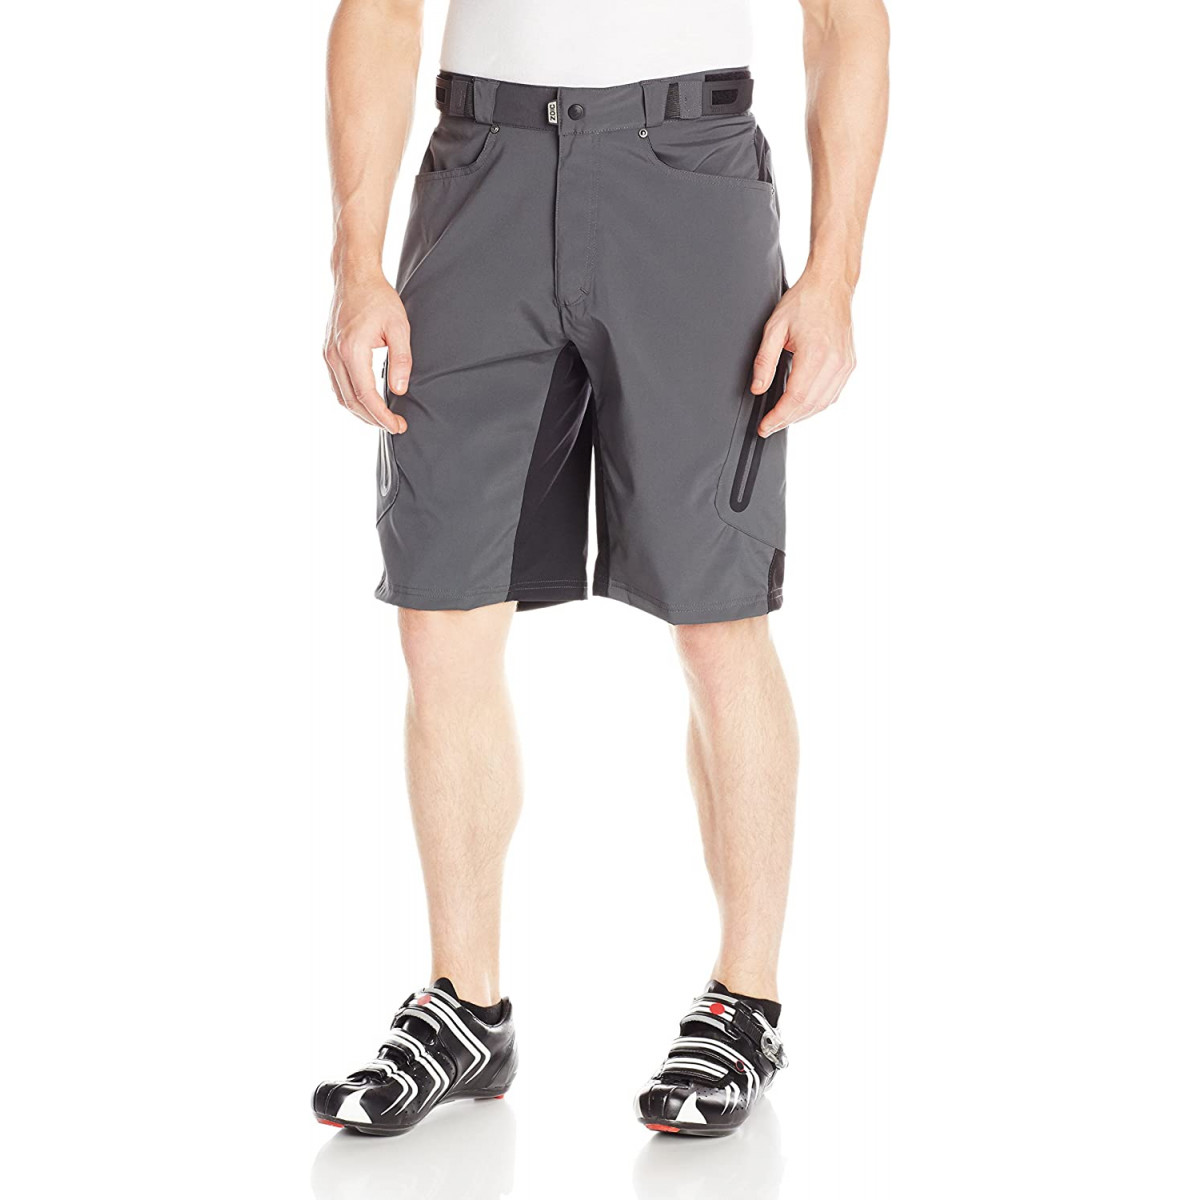 ZOIC Mens Ether Mountain Bike MTB Cycle Riding Short with Padded Essential Liner Relaxed Fit